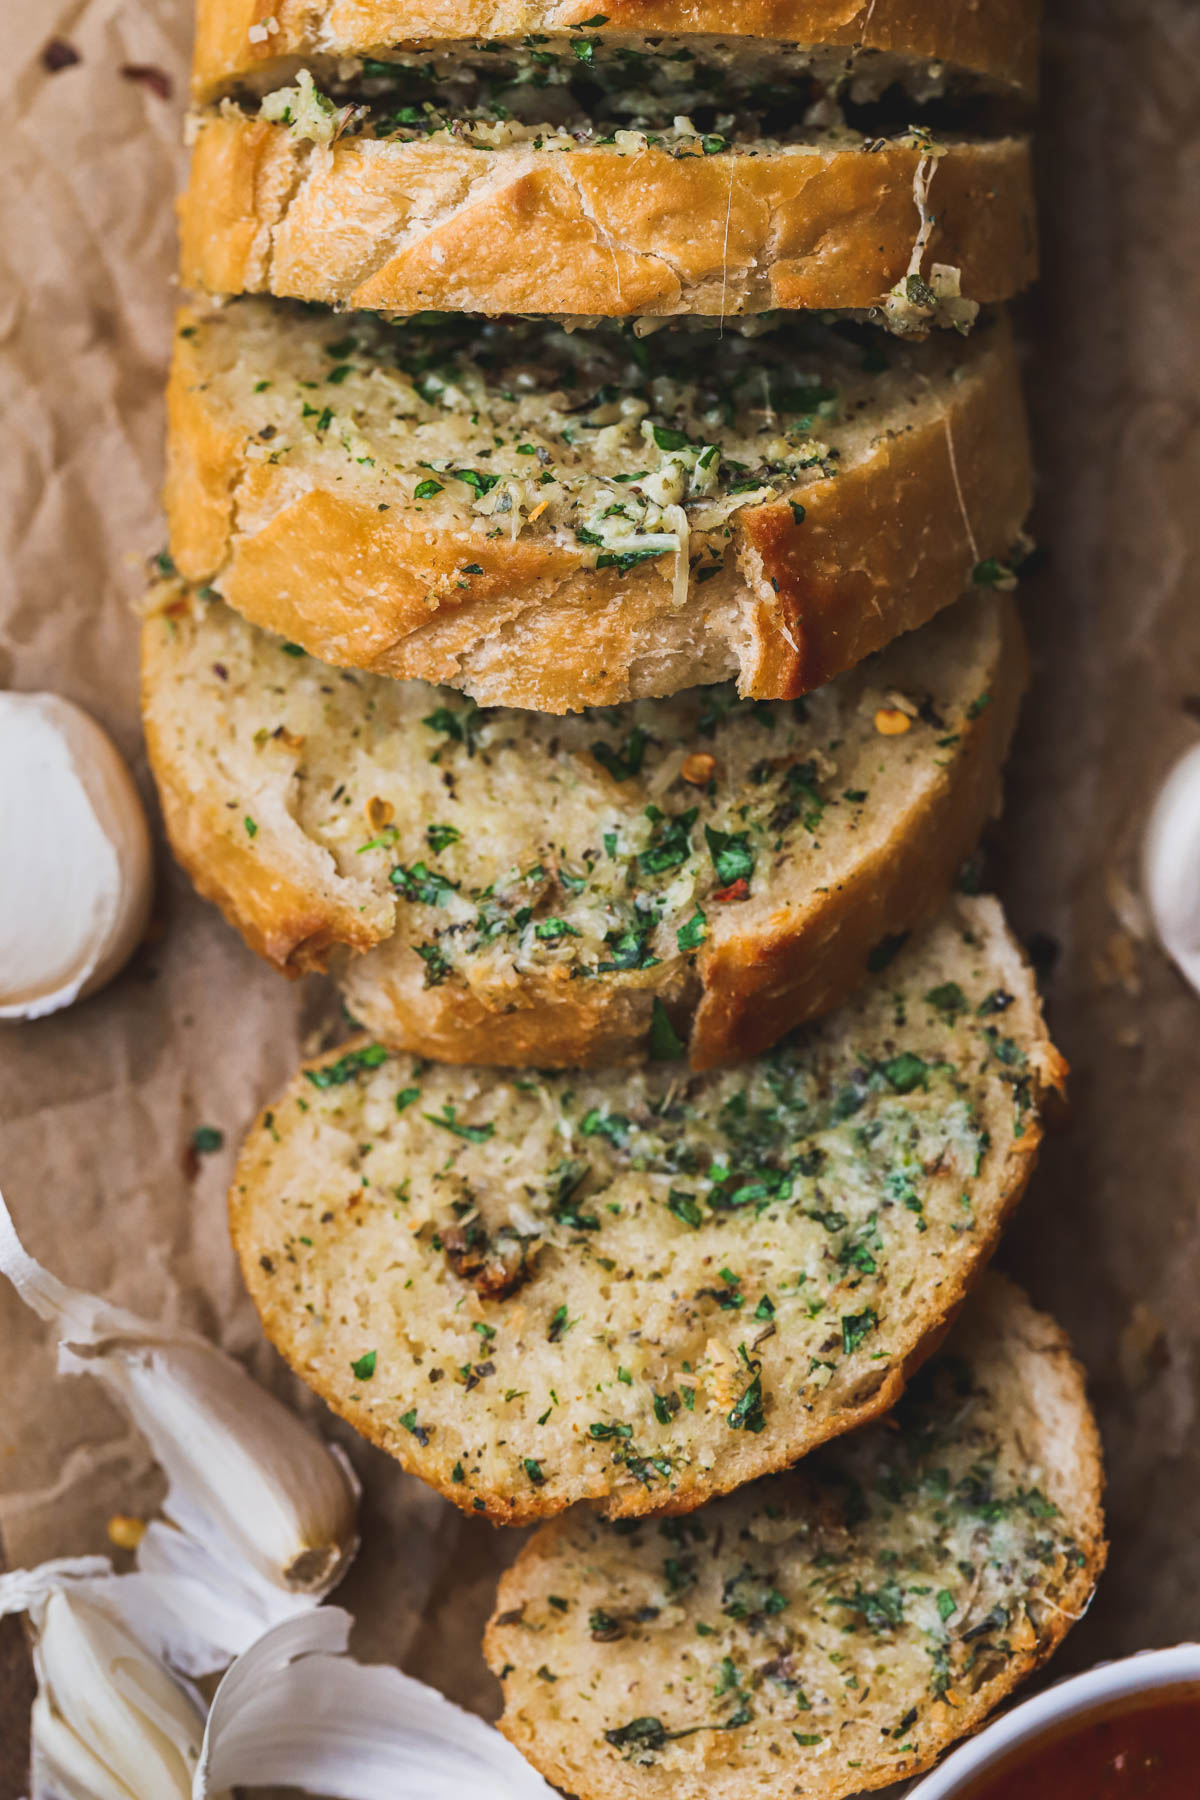 Baked sourdough bread with garlic herb butter spread.  